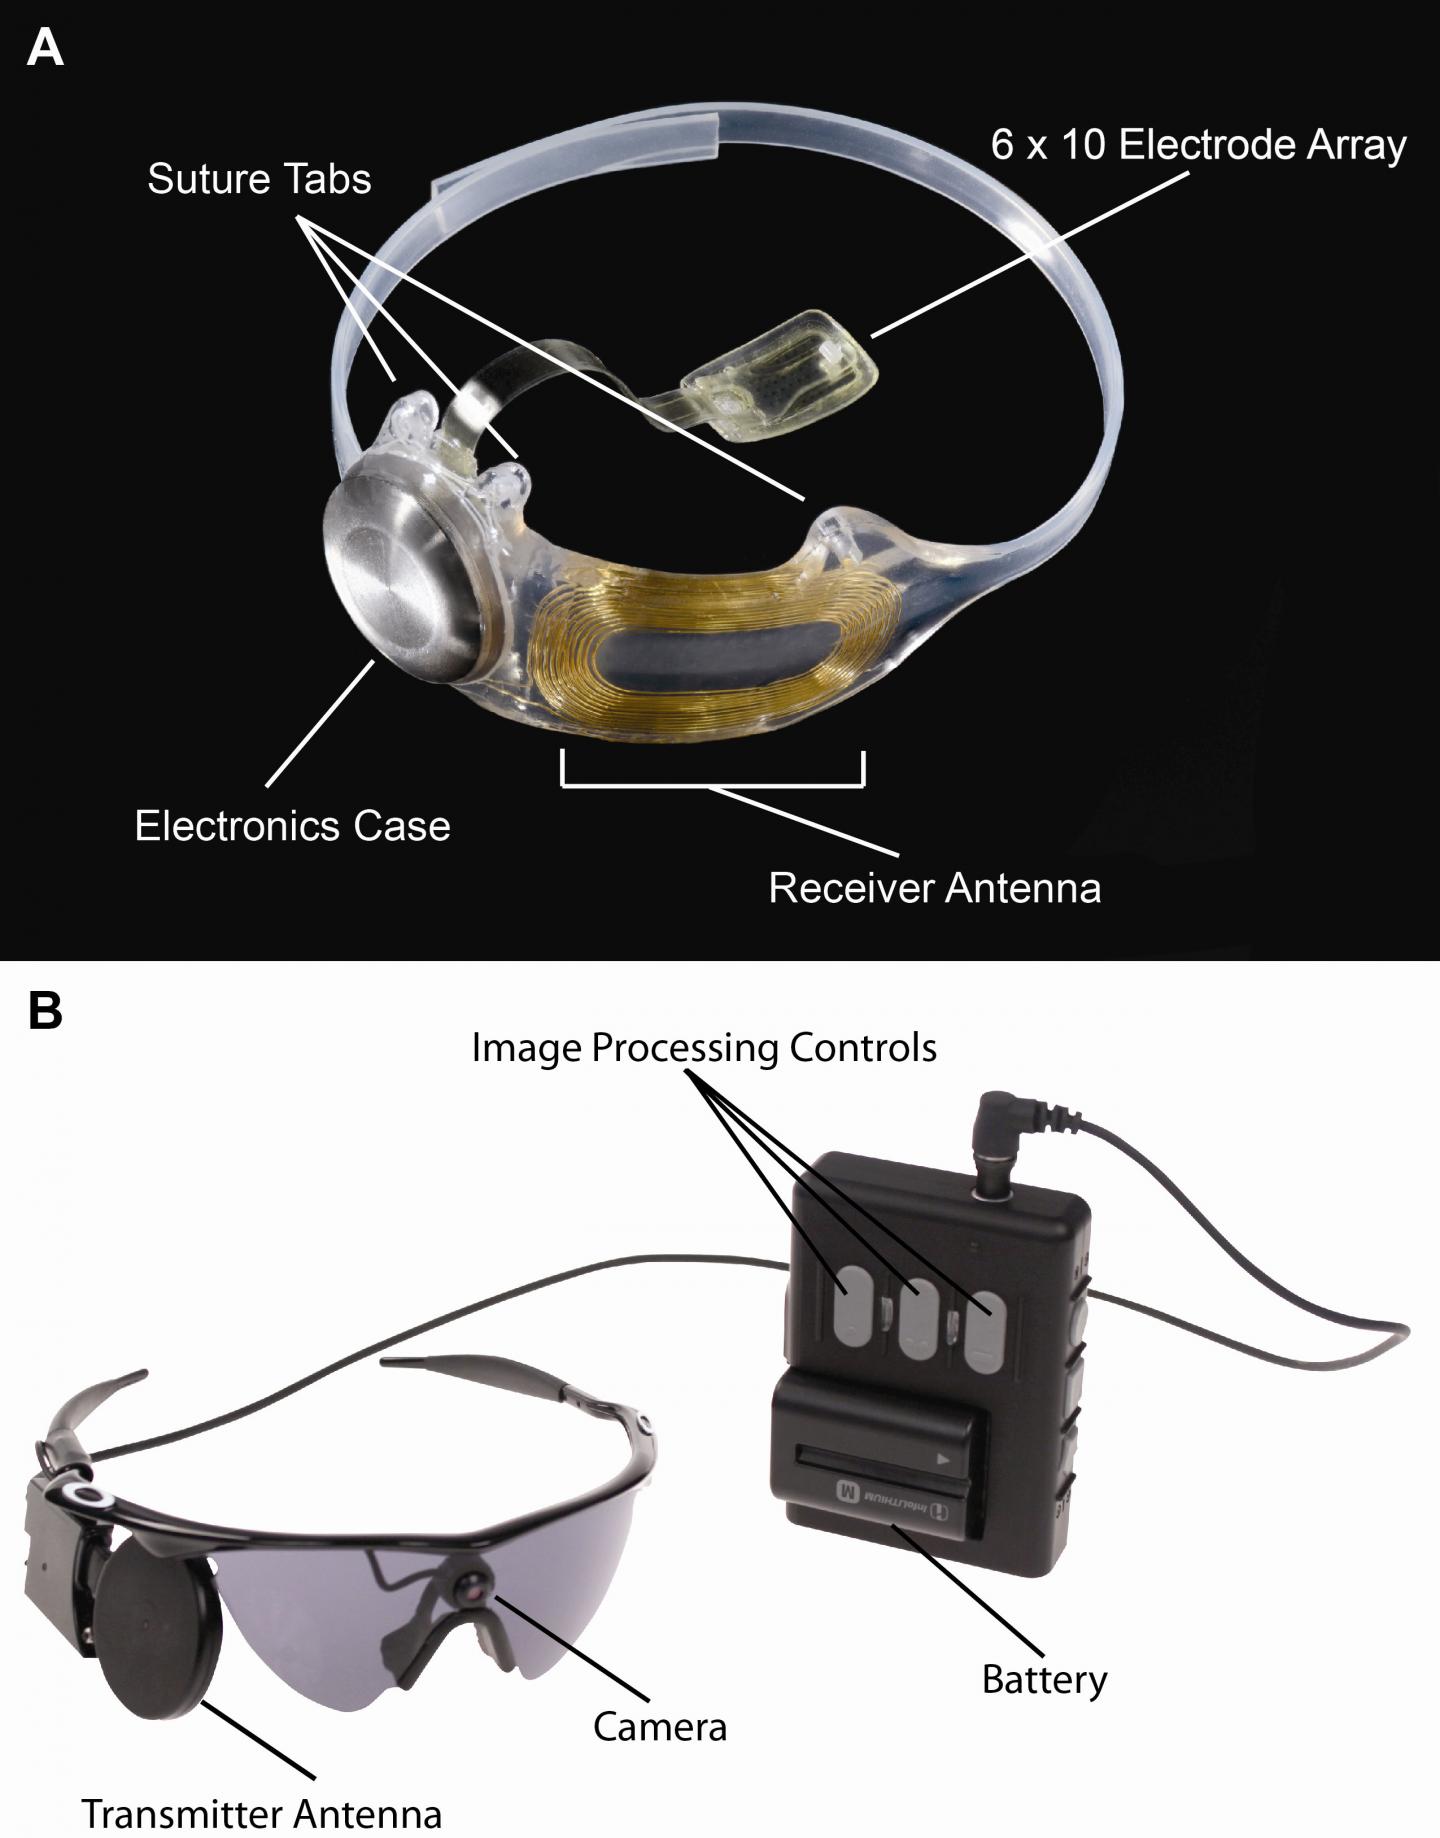  Caption: Figure A, The implanted portions of the Argus II System. Figure B, The external components of the Argus II System. Images in real time are captured by camera mounted on the glasses. The video processing unit down-samples and processes the image, converting it to stimulation patterns. Data and power are sent via radiofrequency link form the transmitter antenna on the glasses to the receiver antenna around the eye. A removable, rechargeable battery powers the system. Credit: Photo courtesy of Second Sight Medical Products, Inc.